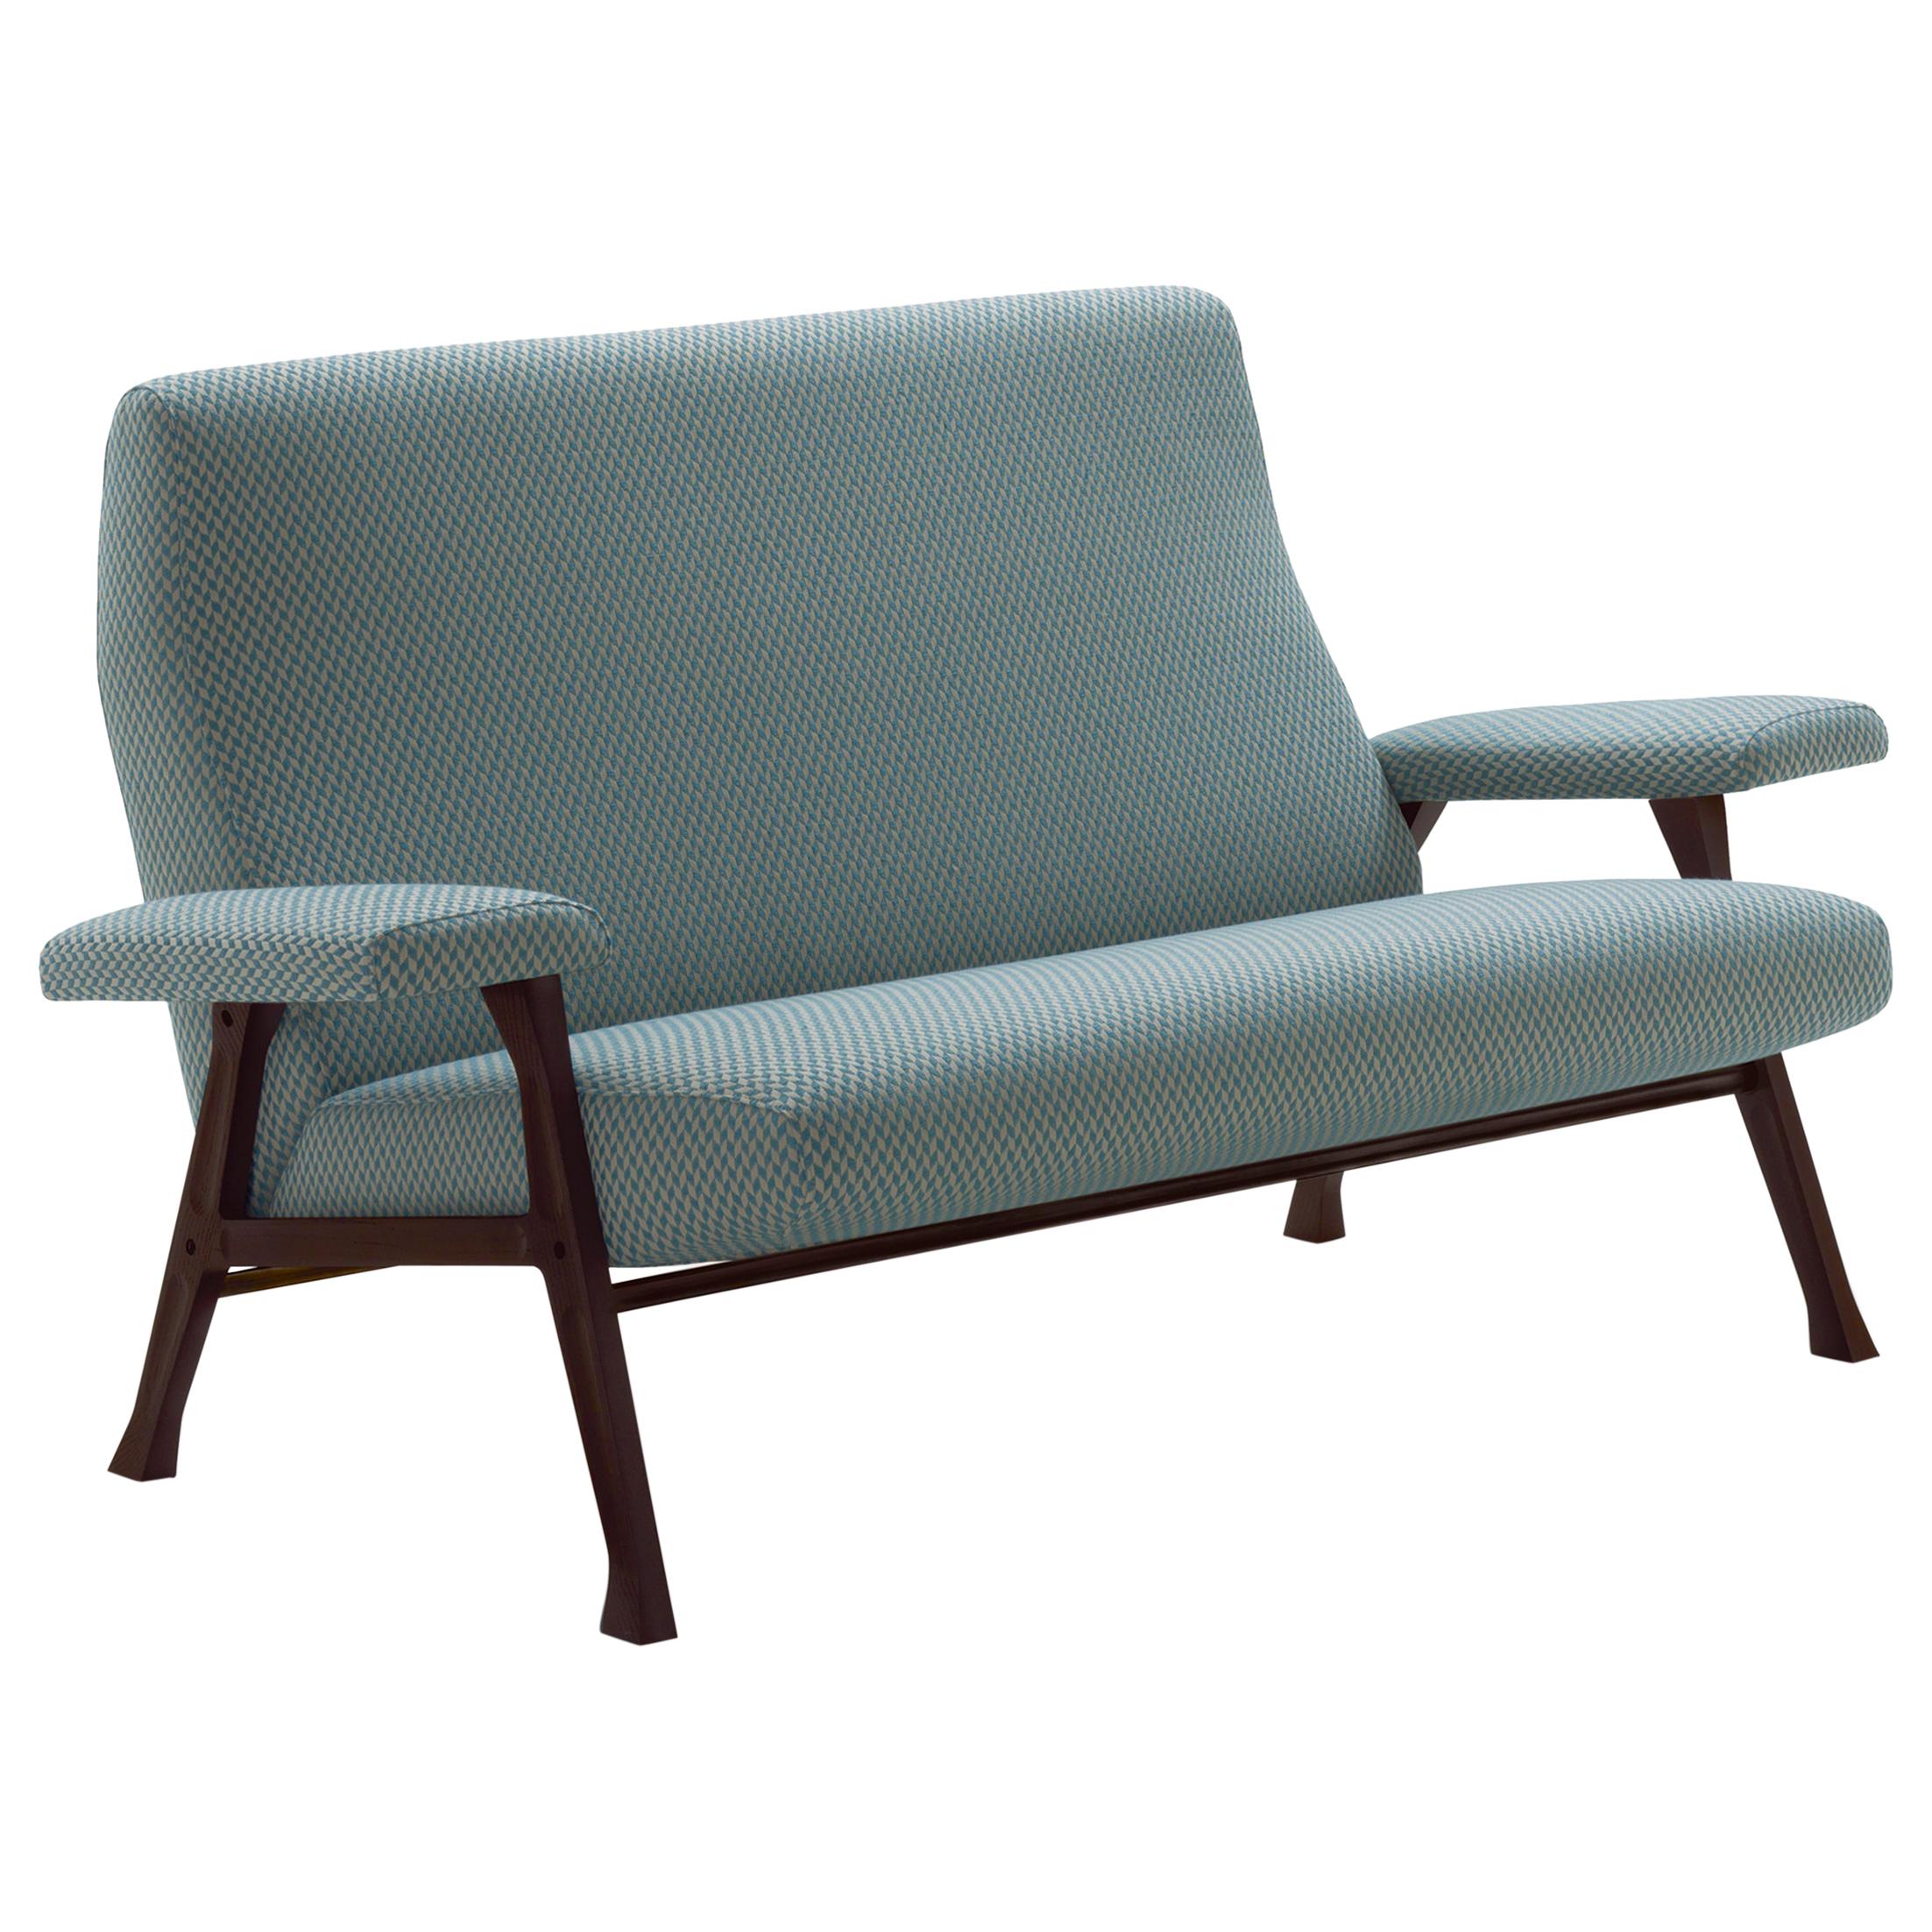 Arflex Hall Sofa in Barre Fabric and Wood Legs by Roberto Menghi